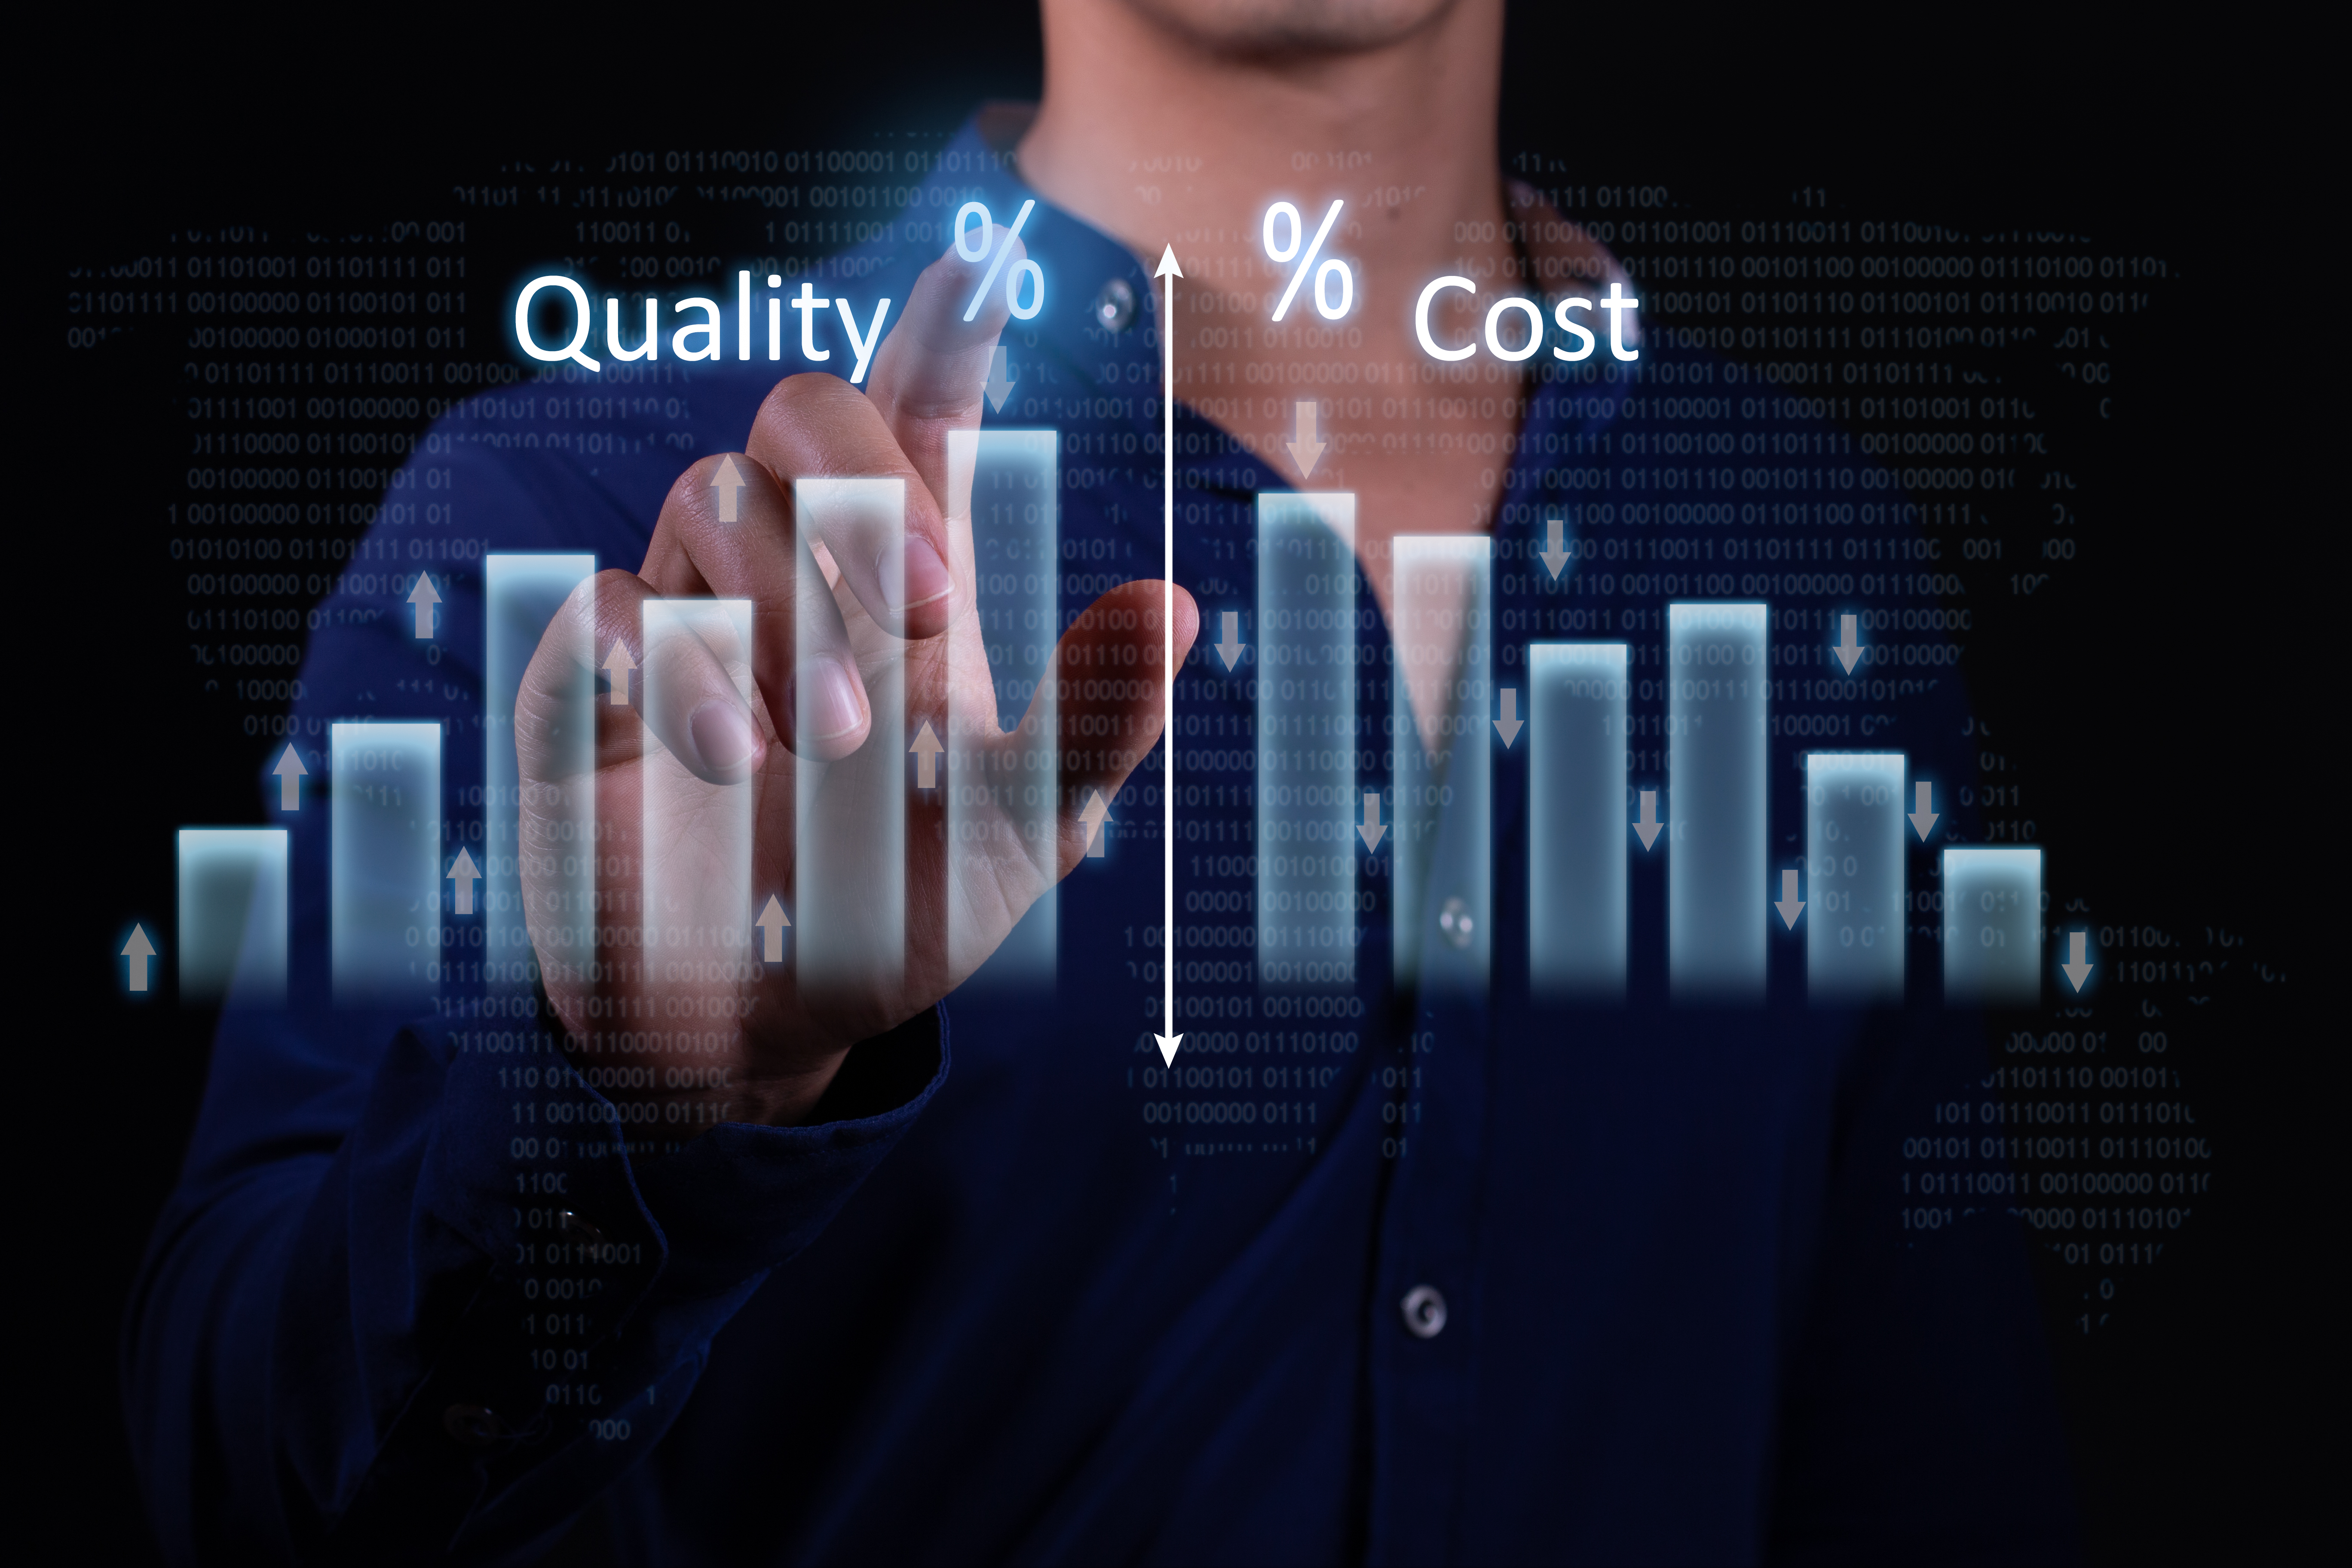 Business Optimization: Cost Control, Quality, and Project Management